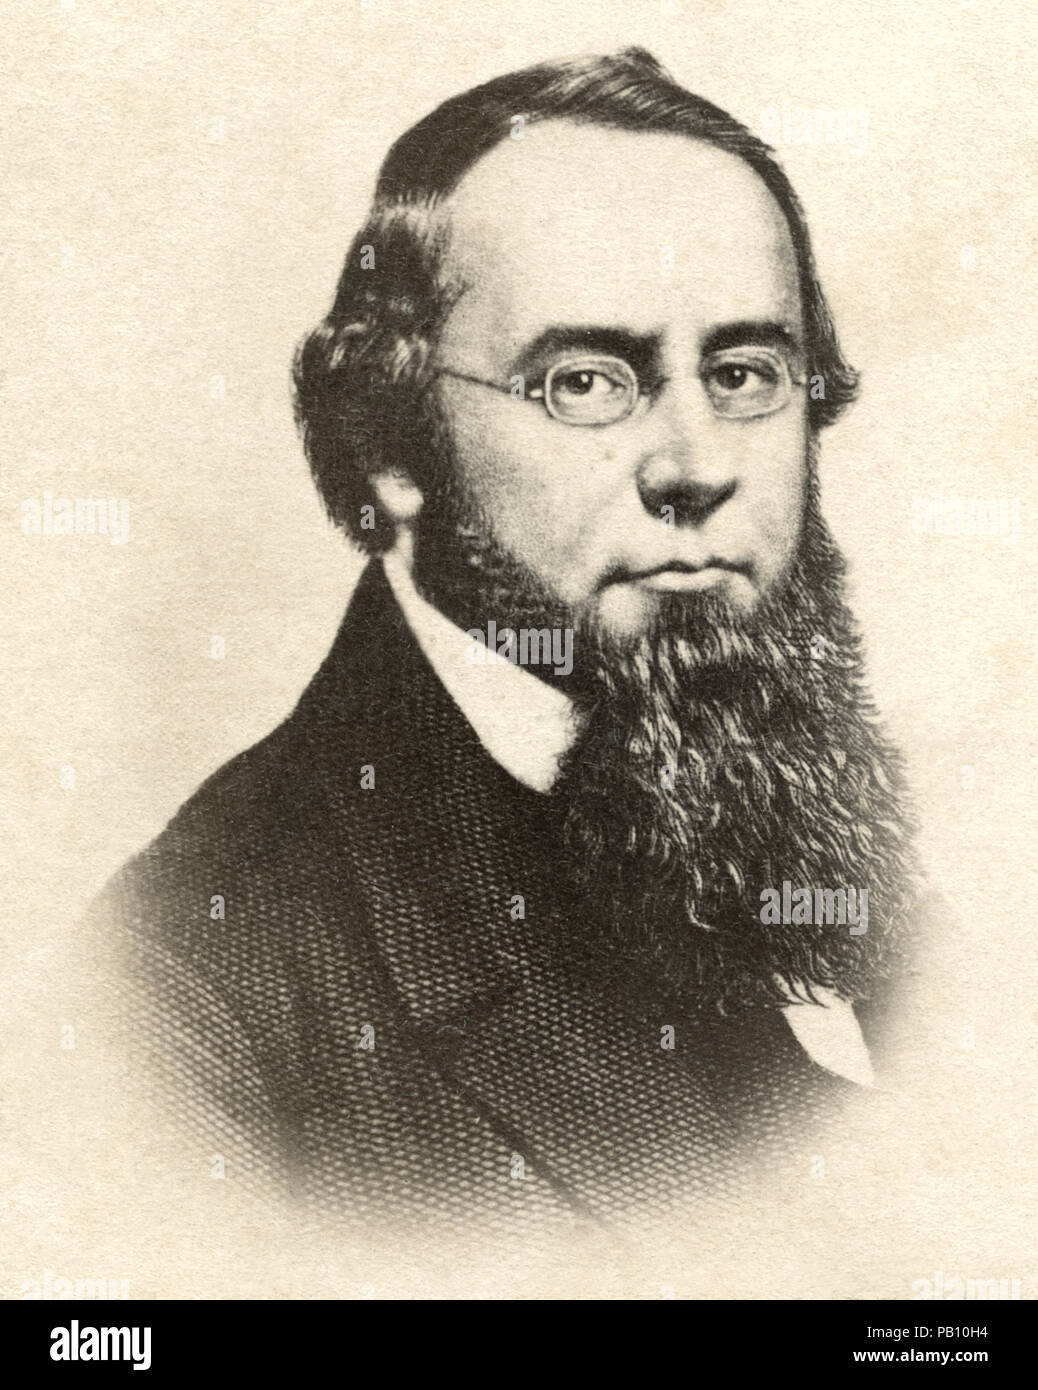 Edwin McMasters Stanton (1814-69), American Lawyer and Politician, Served as Secretary of War under  U.S. President Abraham Lincoln during the American Civil War, Portrait, Stock Photo